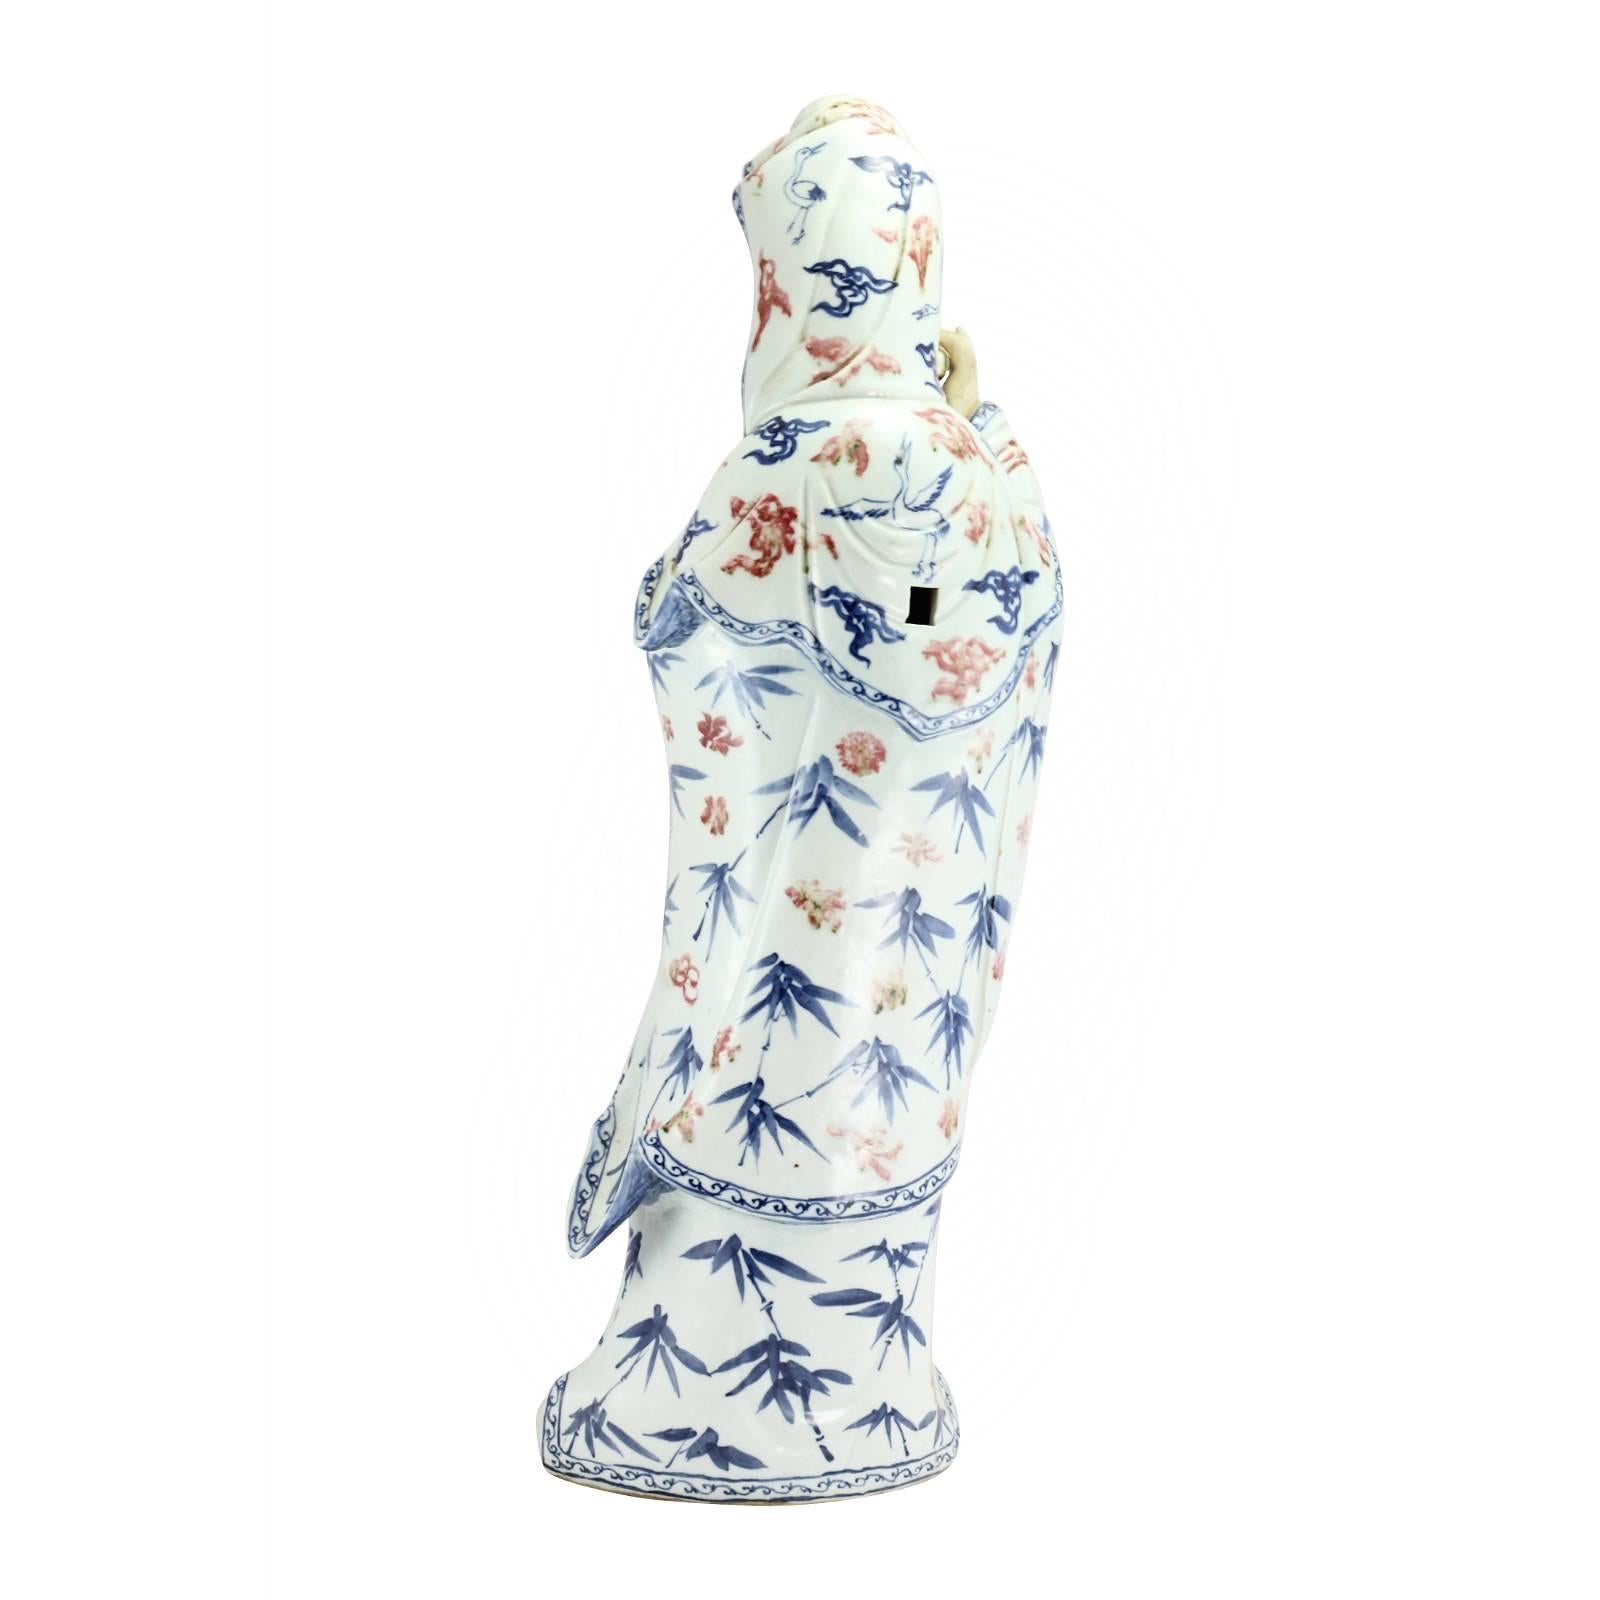 Glazed Early 20th Century Chinese Porcelain Guanyin